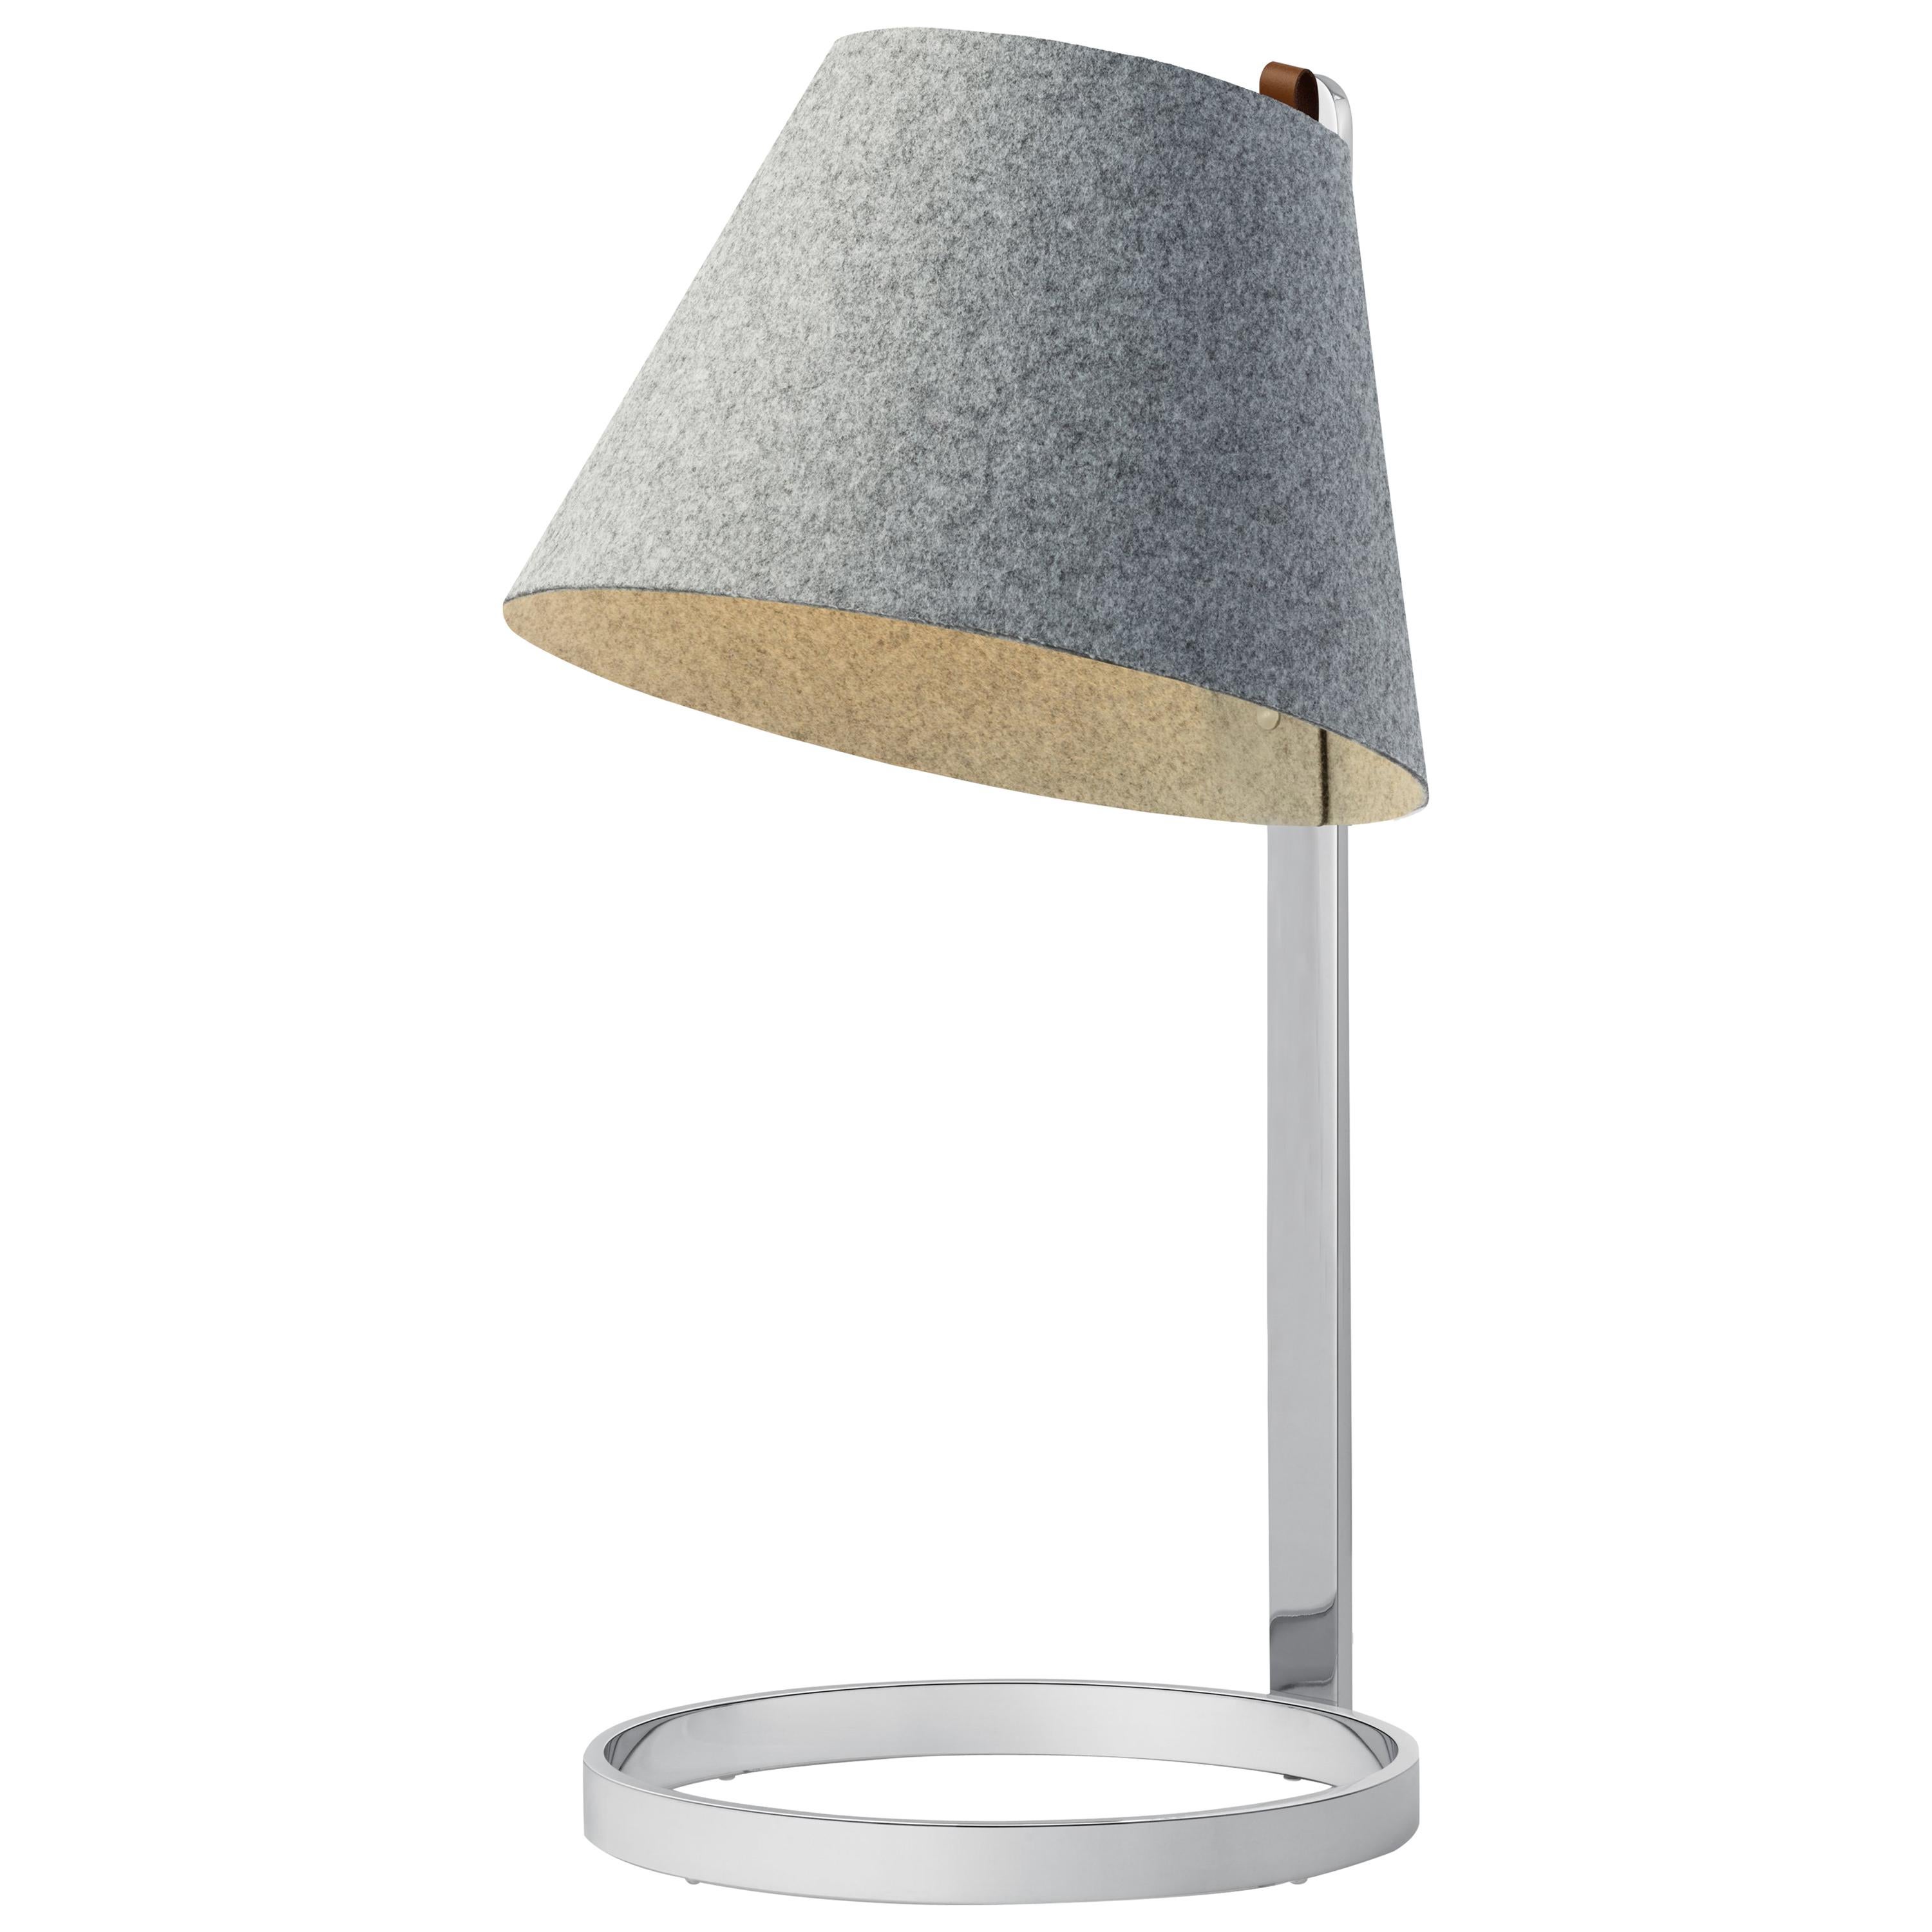 Lana Large Table Lamp in Stone and Grey with Chrome Base by Pablo Designs